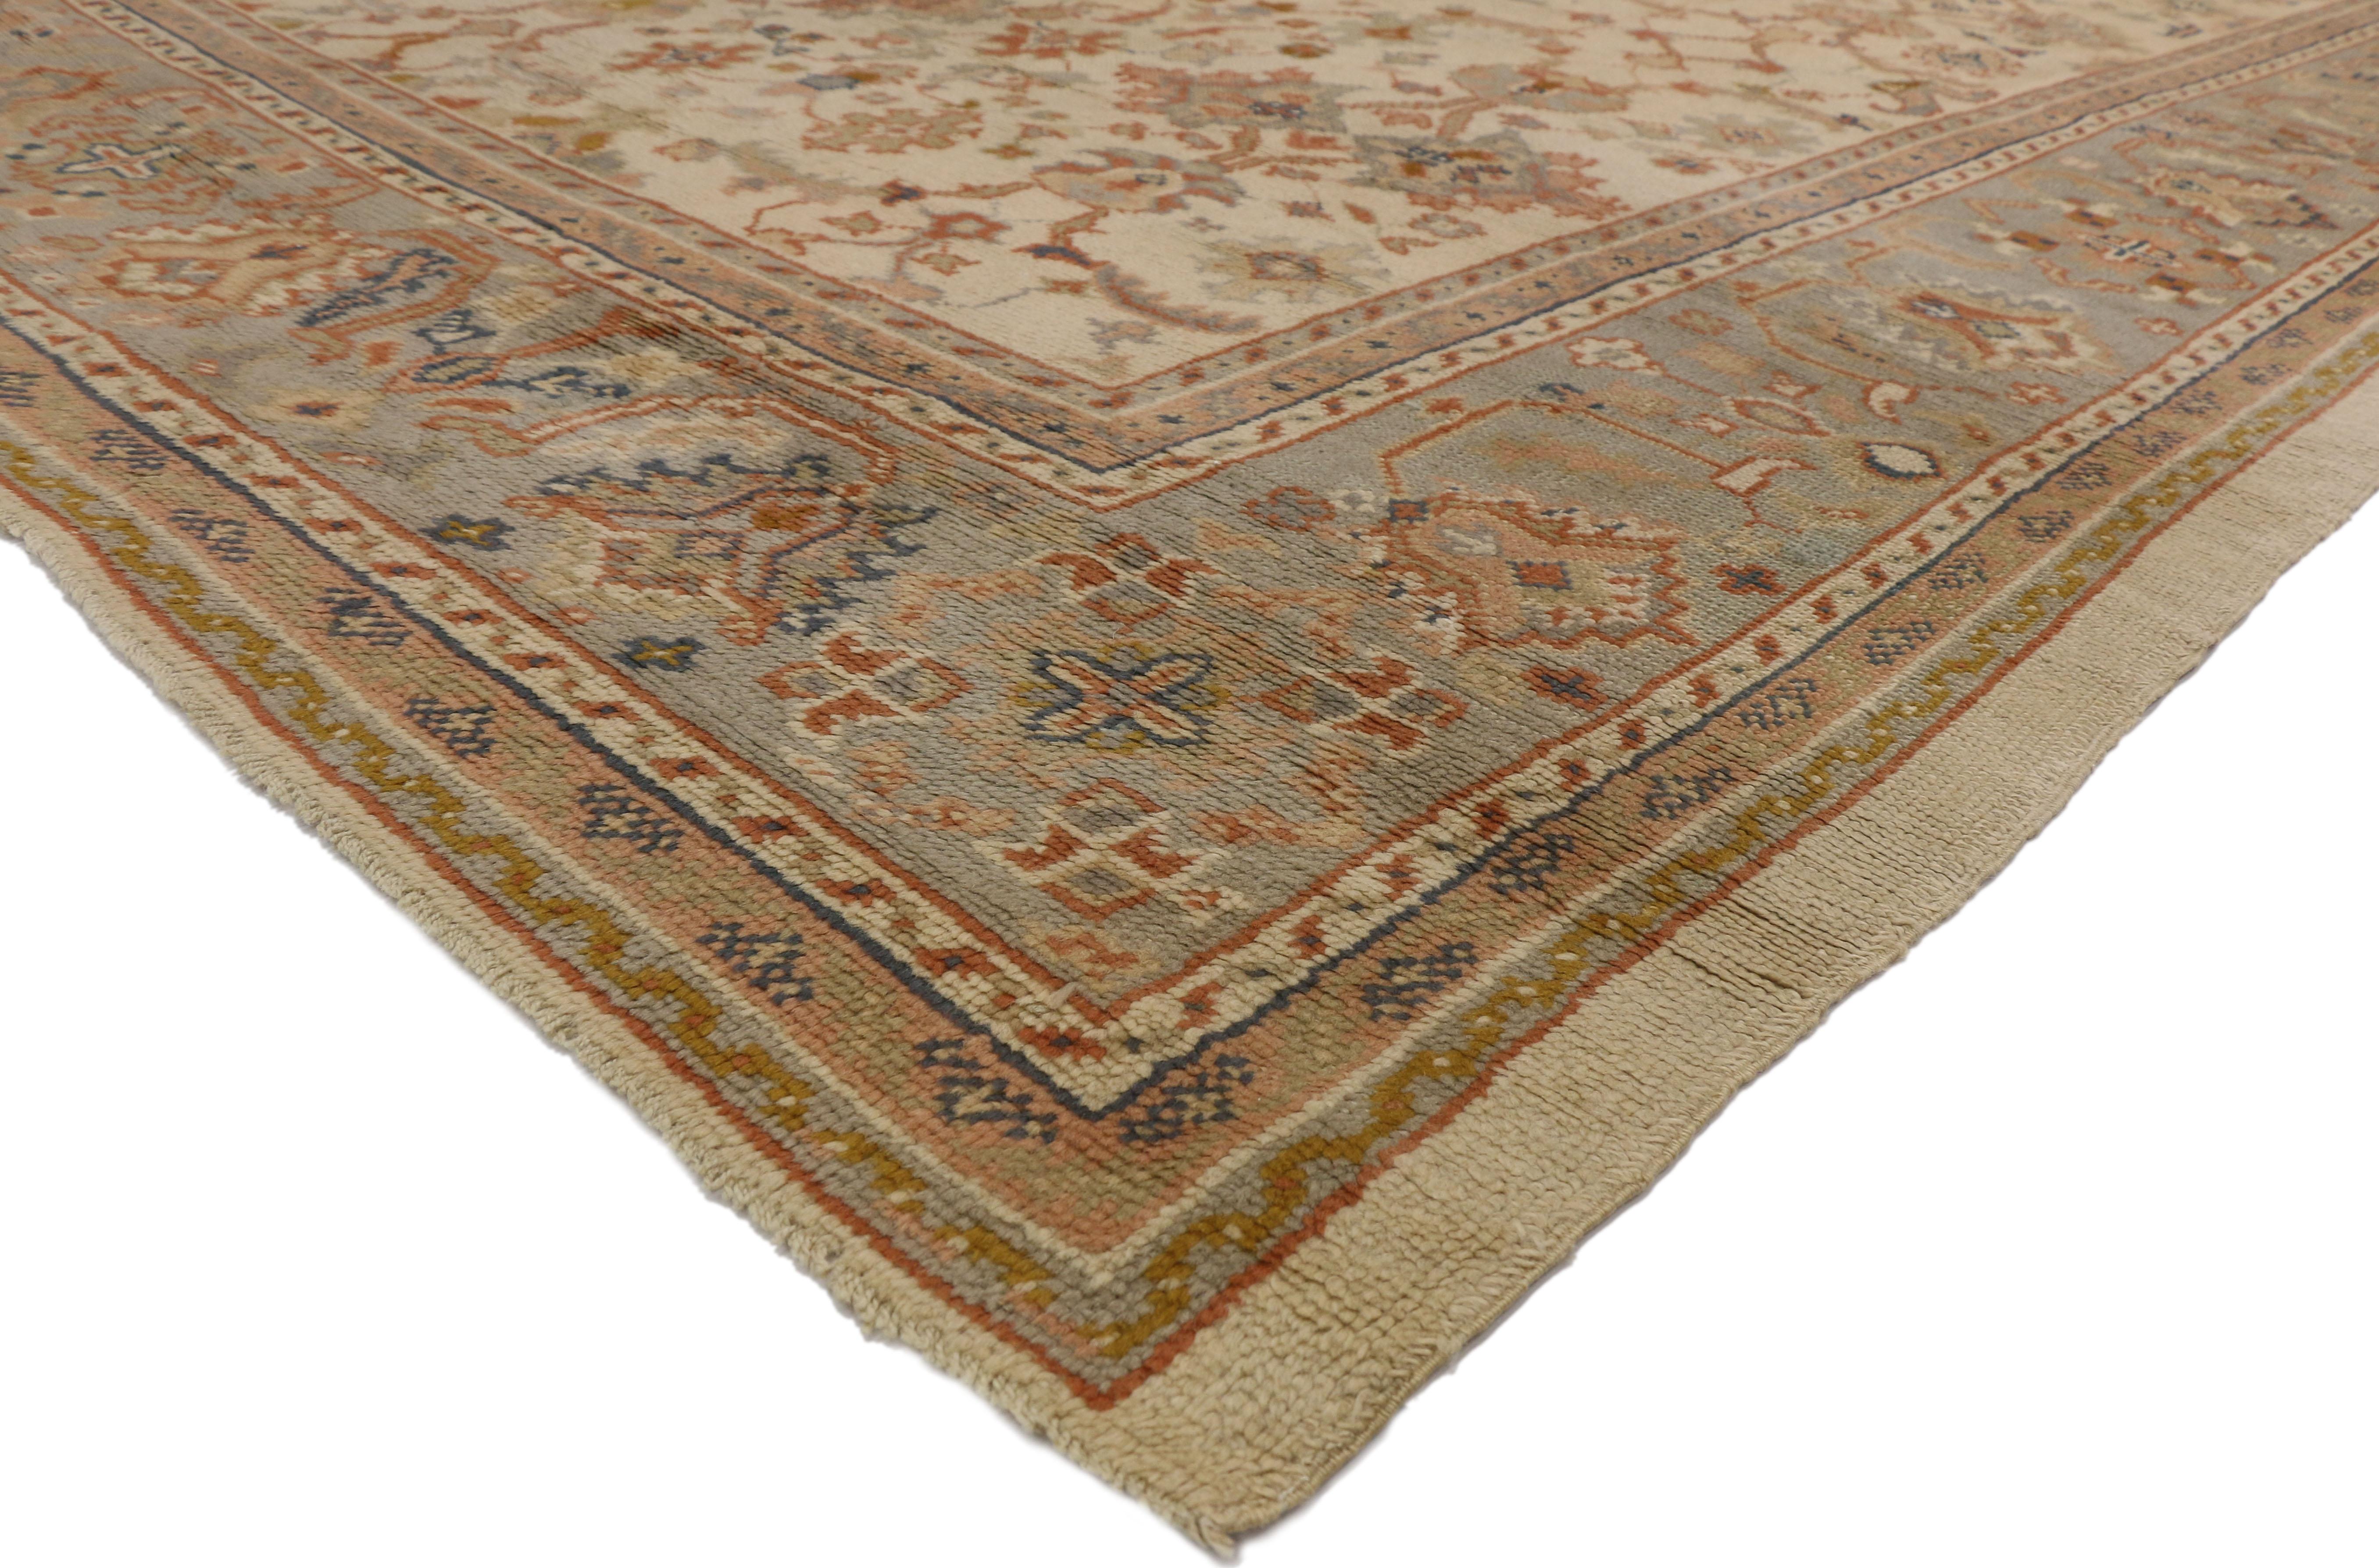 74250 Antique Turkish Oushak Area Rug with French Provincial Style, 11'02 X 14'00. This hand-knotted wool antique Turkish Oushak rug with French Provincial style features an all-over stylized floral lattice pattern composed of Harshang-style motifs,